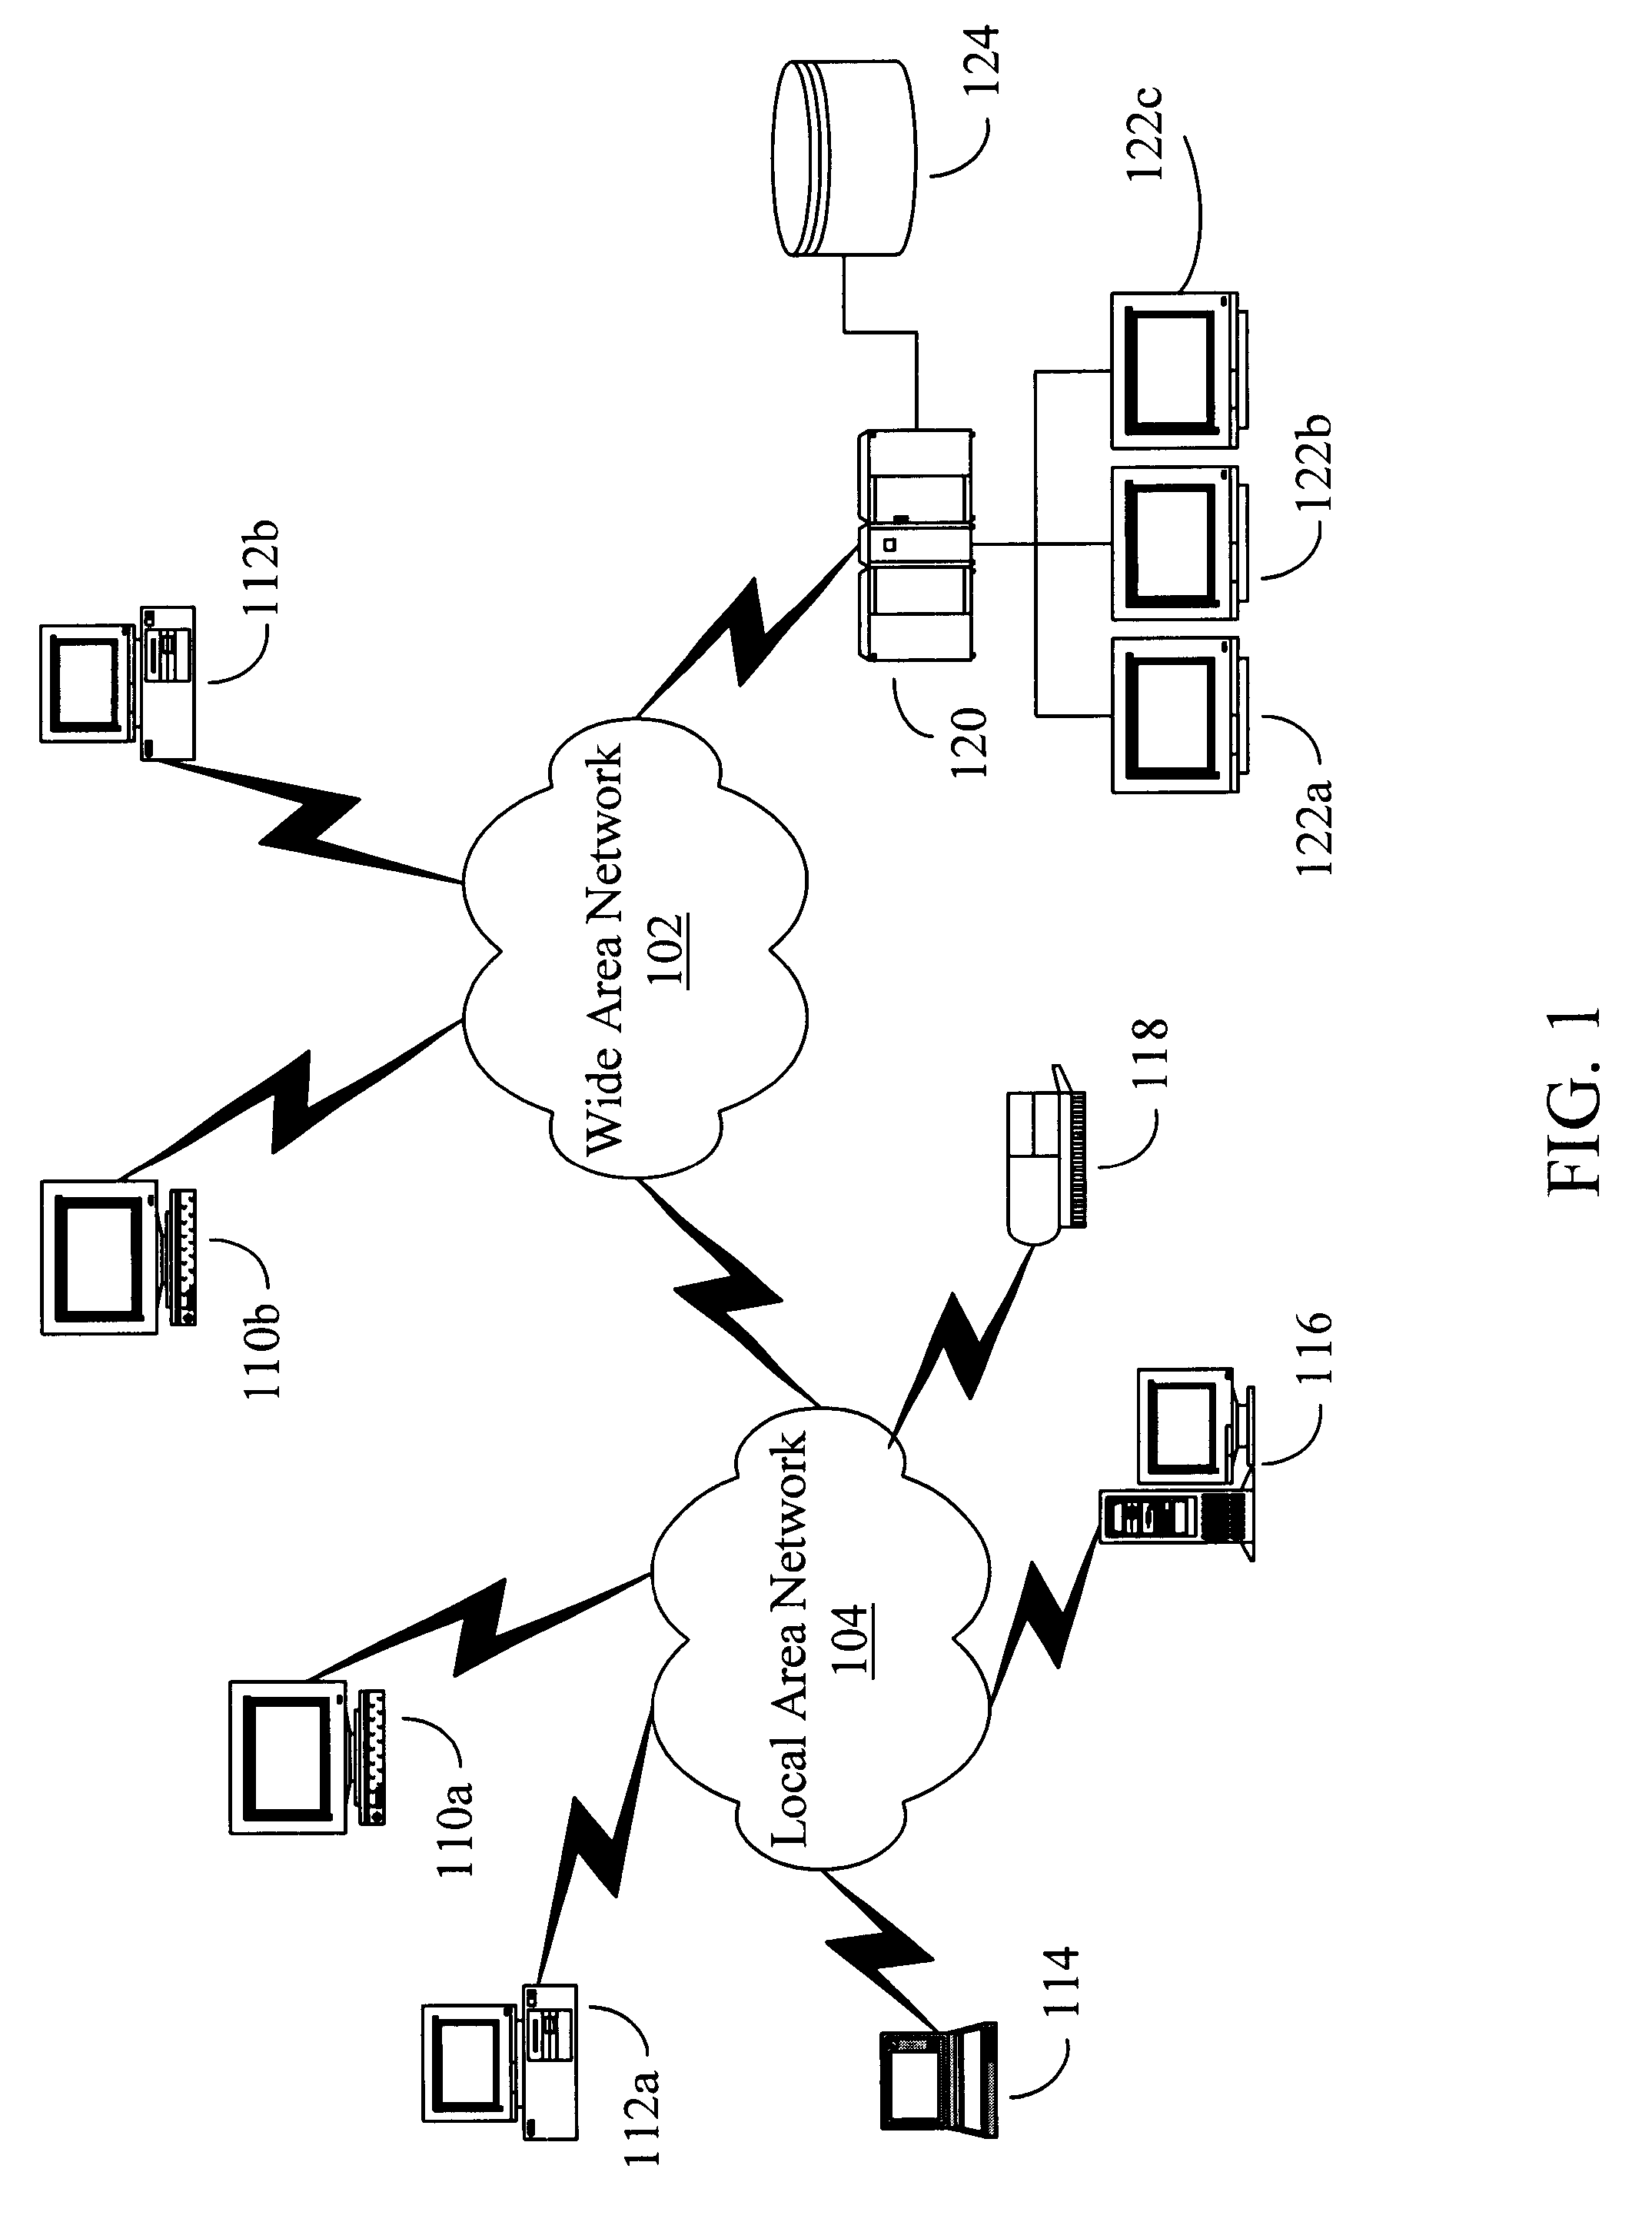 Referential integrity navigation in a database system